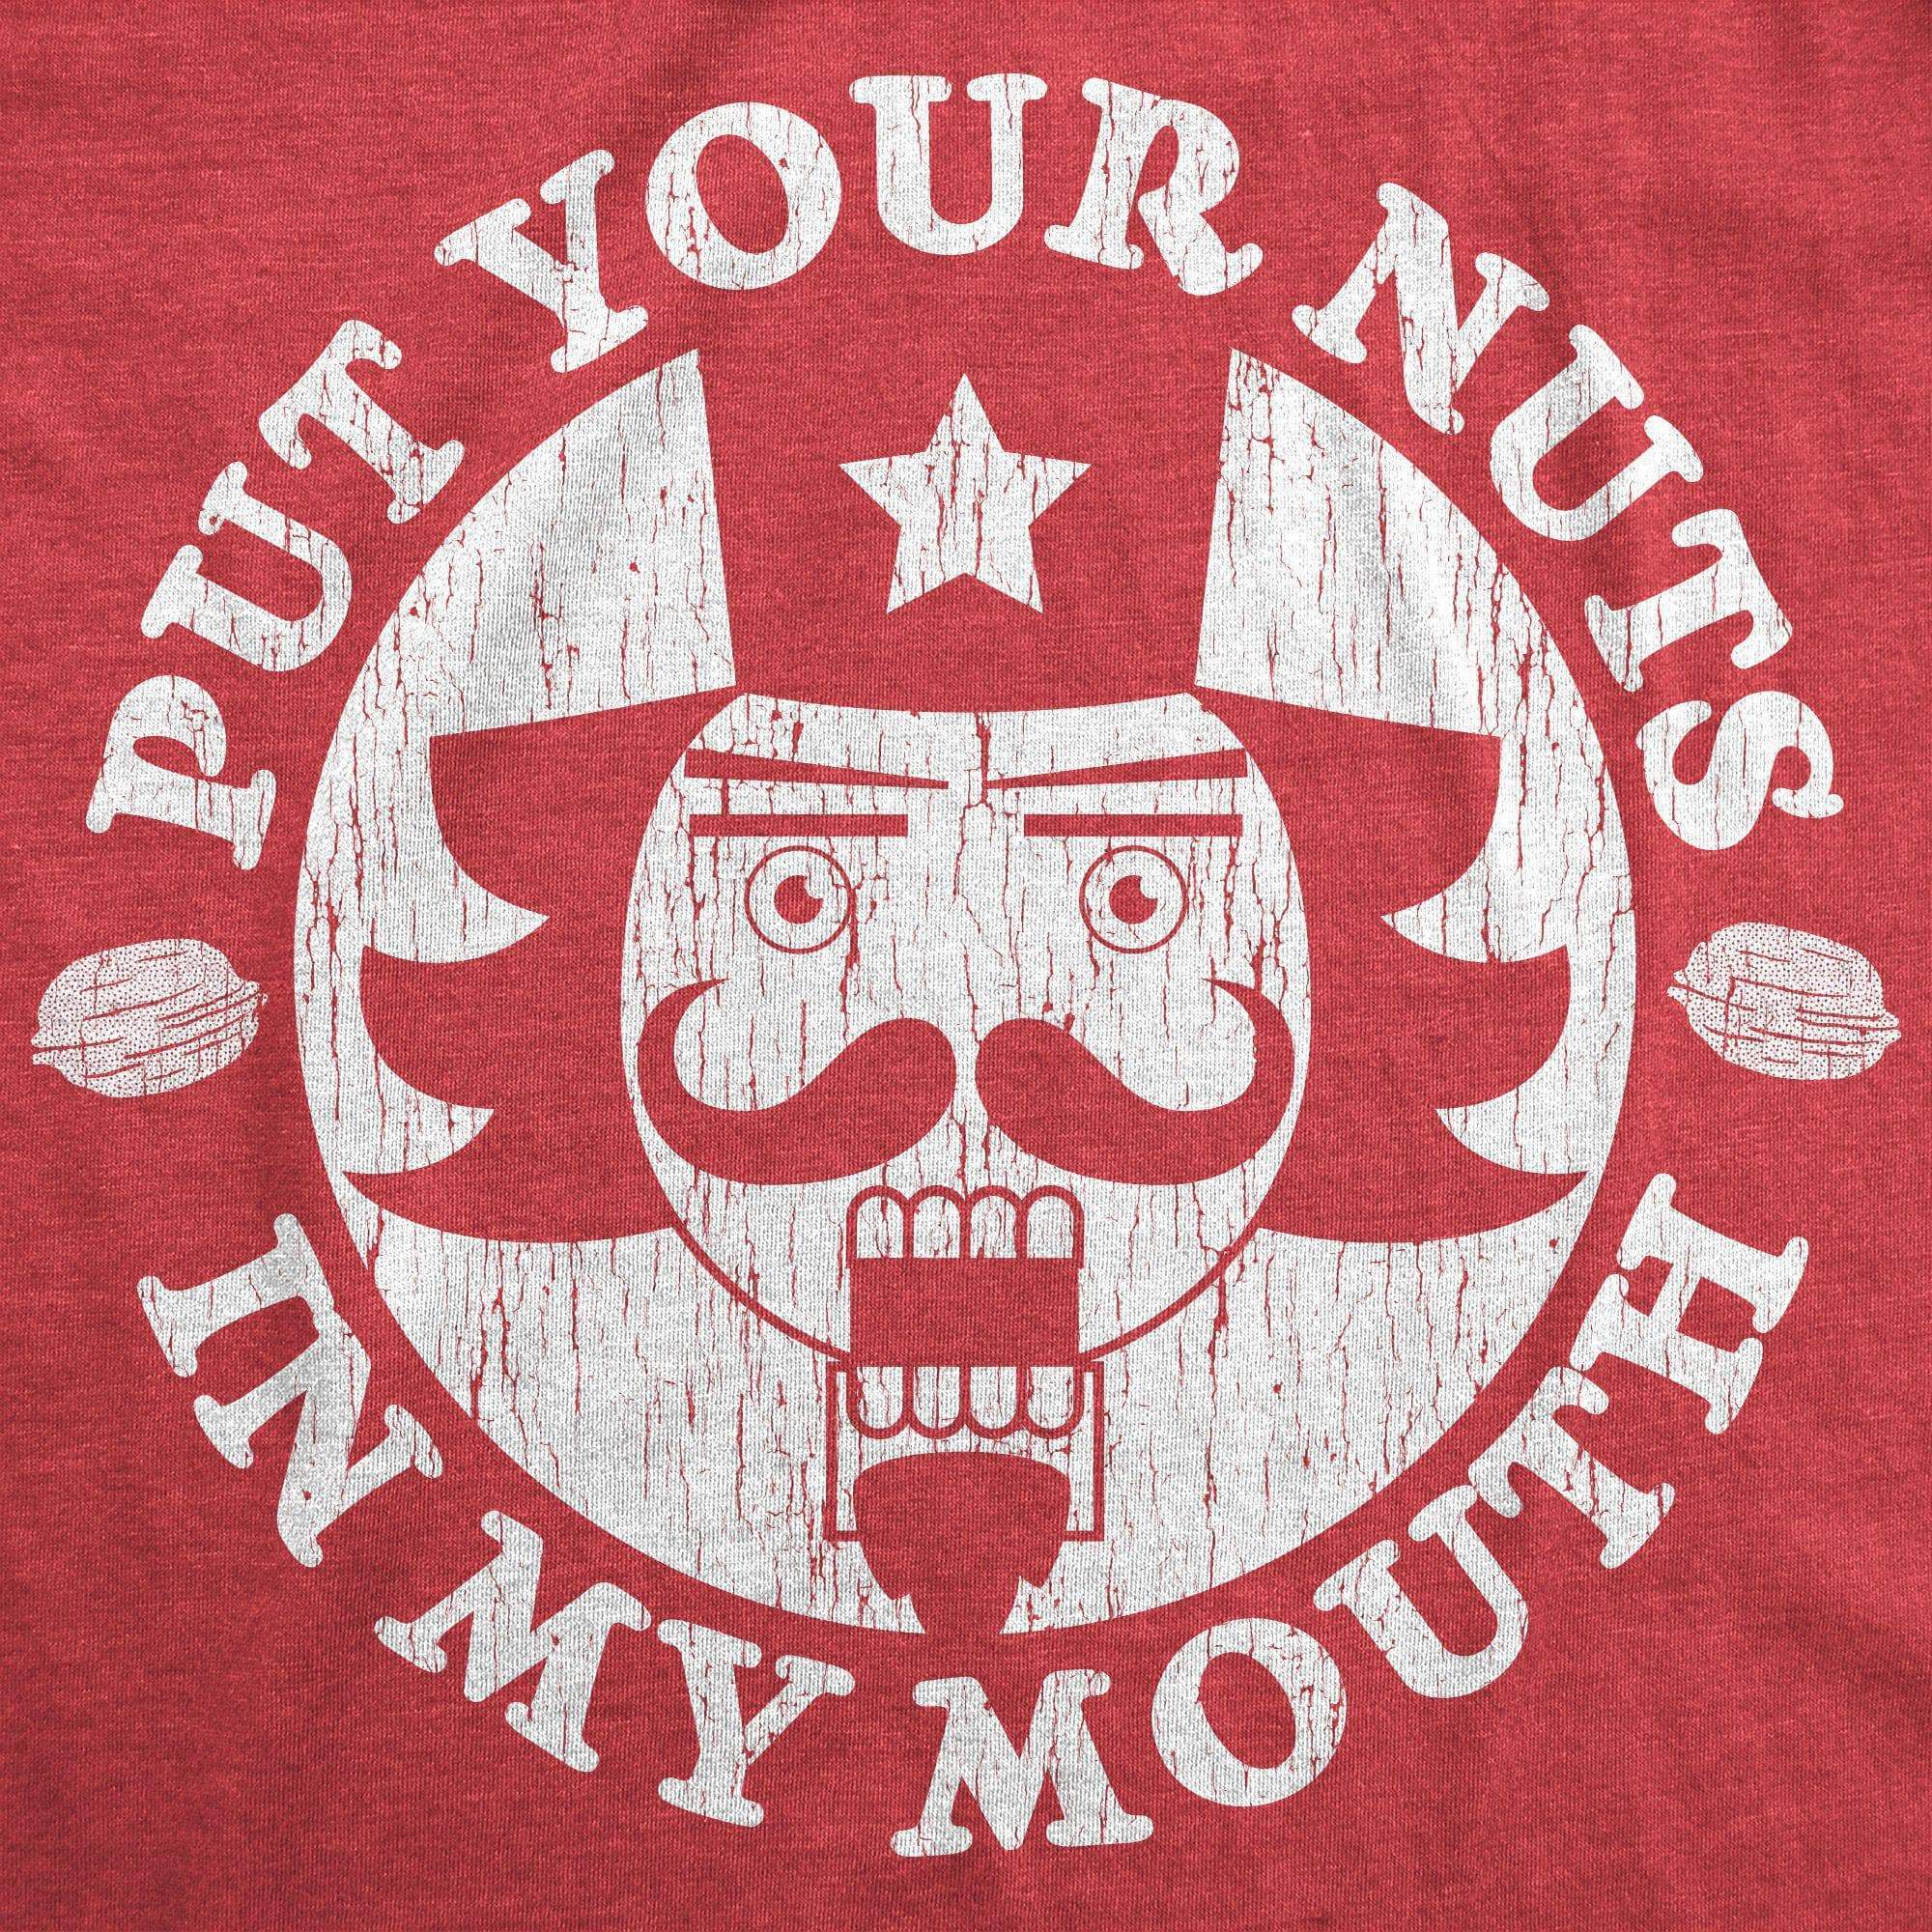 Put Your Nuts In My Mouth Women's Tshirt - Crazy Dog T-Shirts